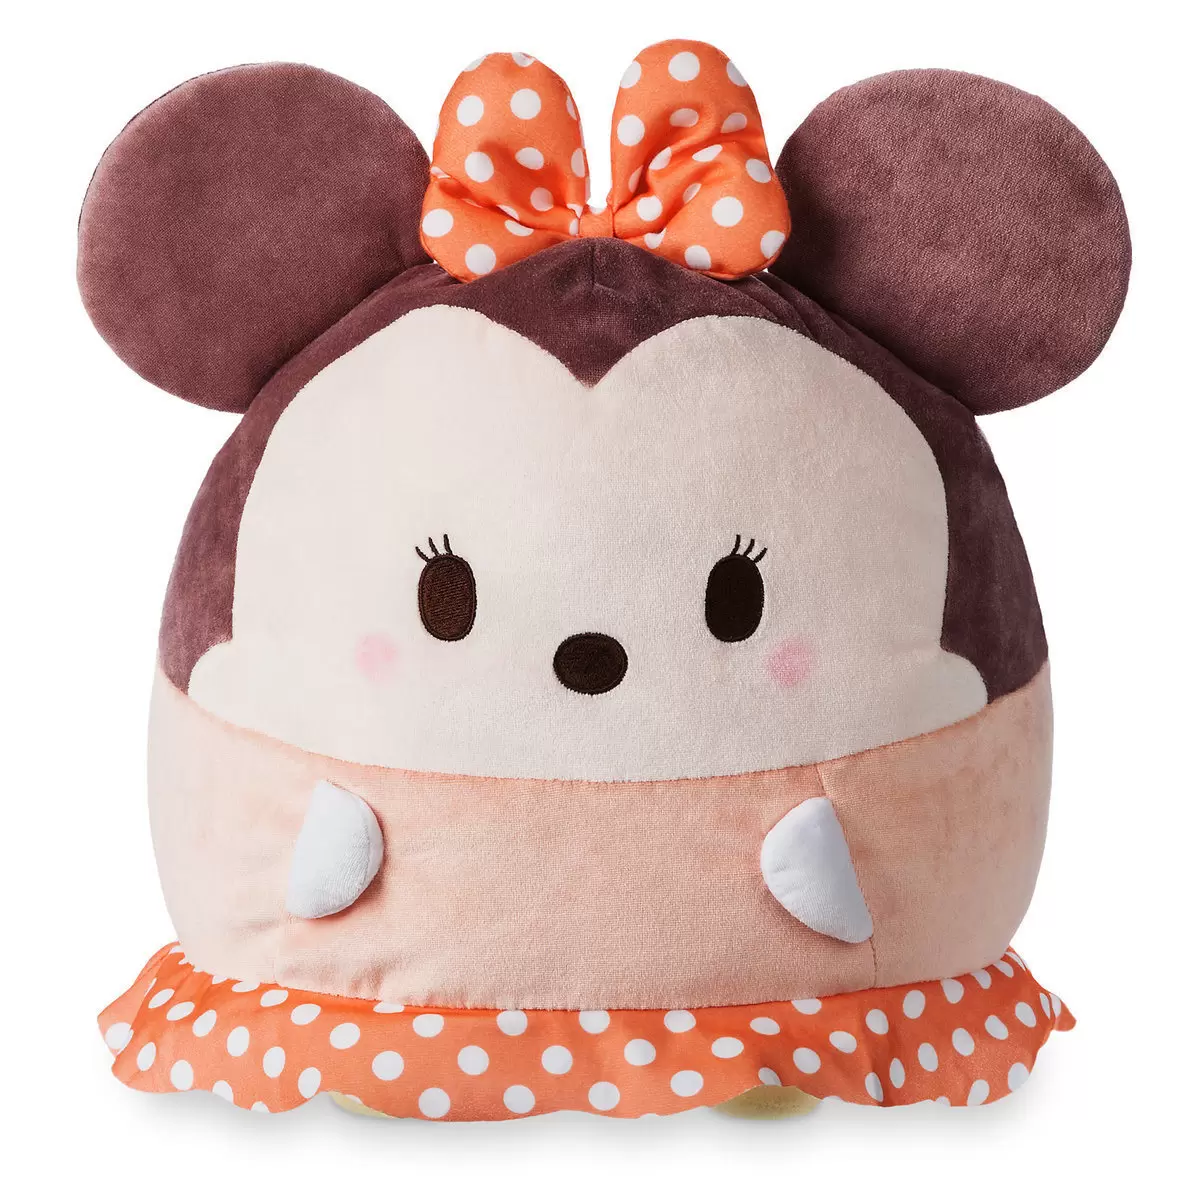 Ufufy - Minnie Mouse 2018